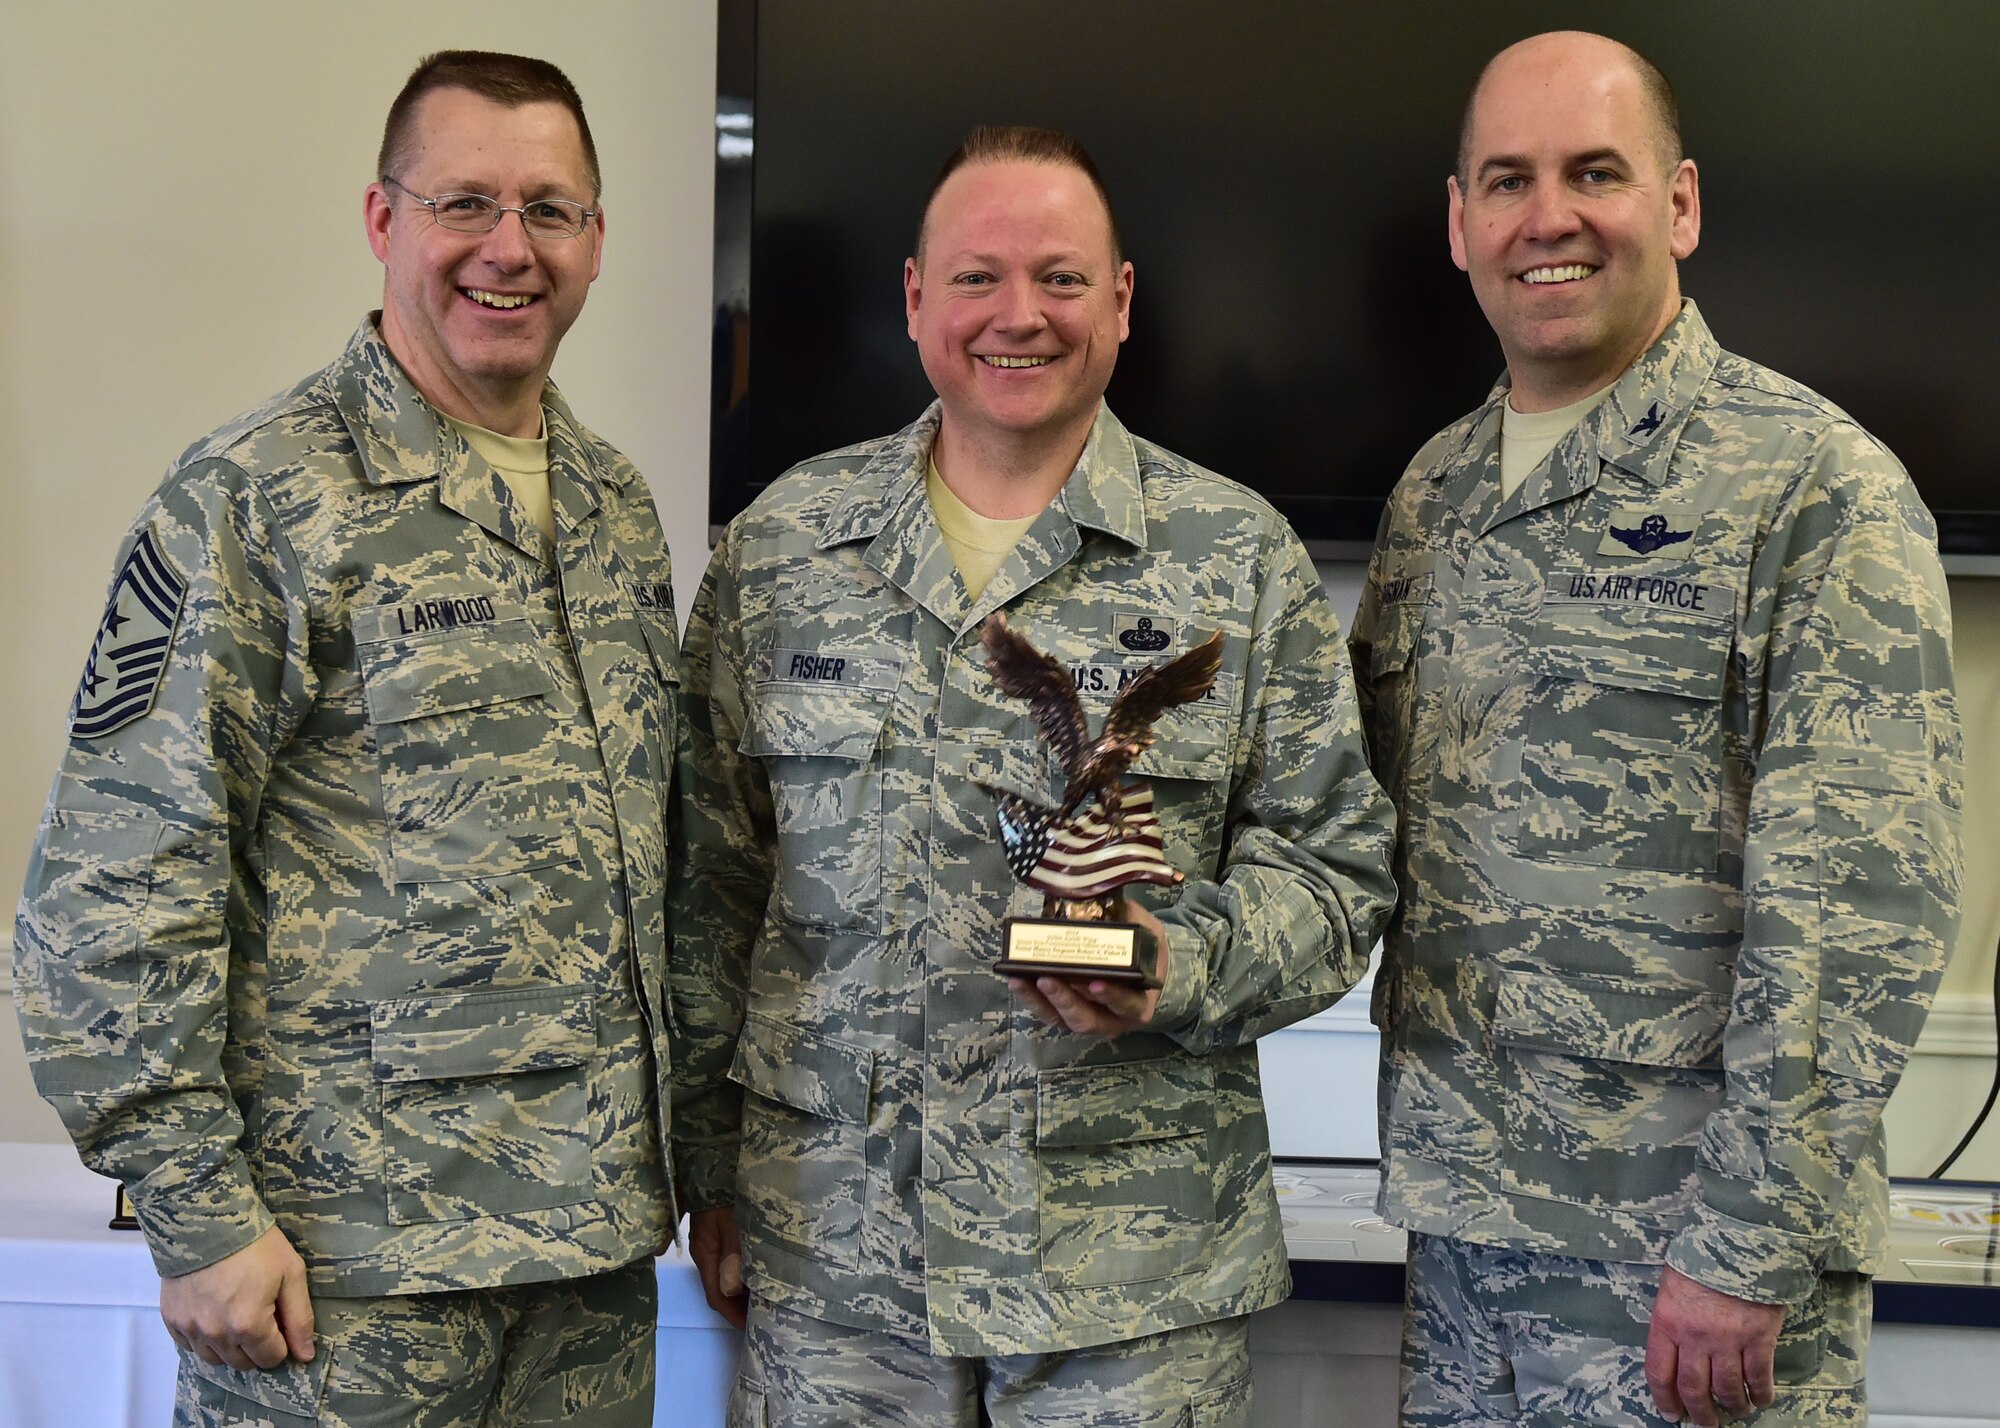 The 910th Airlift Wing's 2014 Senior Non-Commissioned Officer of the Year, Senior Master Sgt. Robert Fisher, poses with 910th Airlift Wing Command Chief Master Sgt. Steven Larwood and 910th Airlift Wing Commander Col. James Dignan, after receiving his award at a ceremony April 12. Fisher is a cyber systems superintendent with the 910th Communications Squadron here. (U.S. Air Force photo/Senior Airman Rachel Kocin)